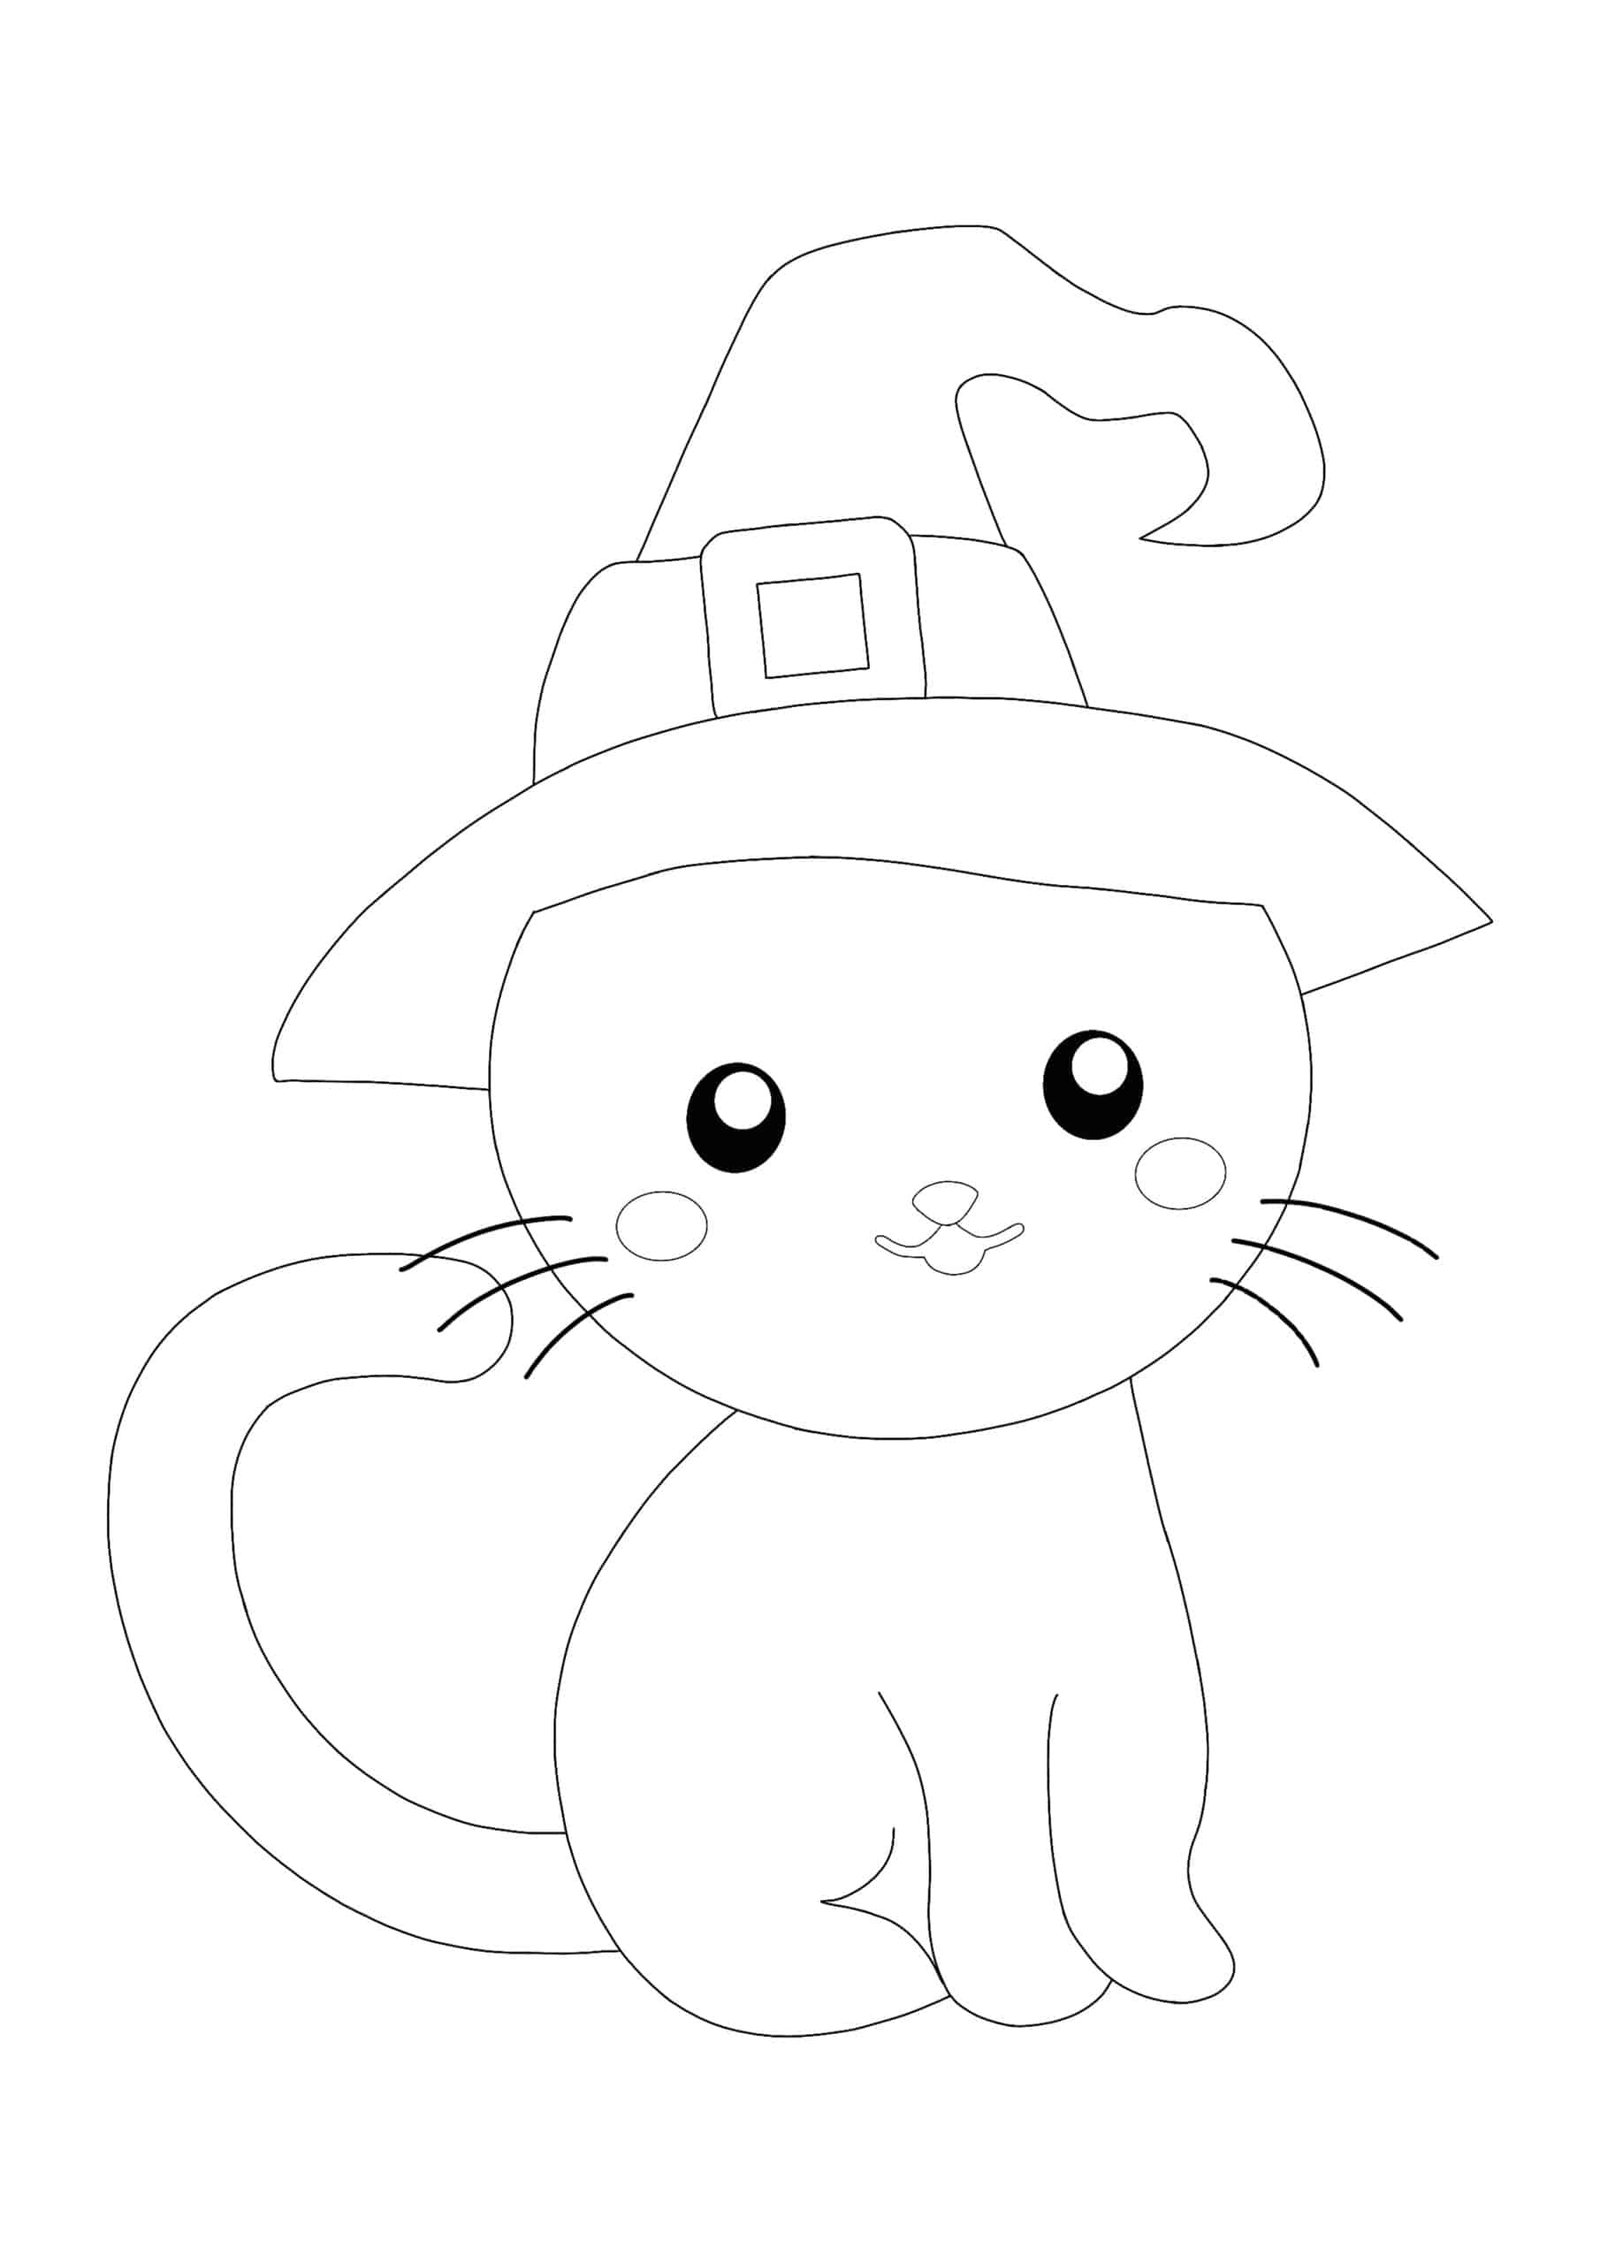 Magic Cat coloring page